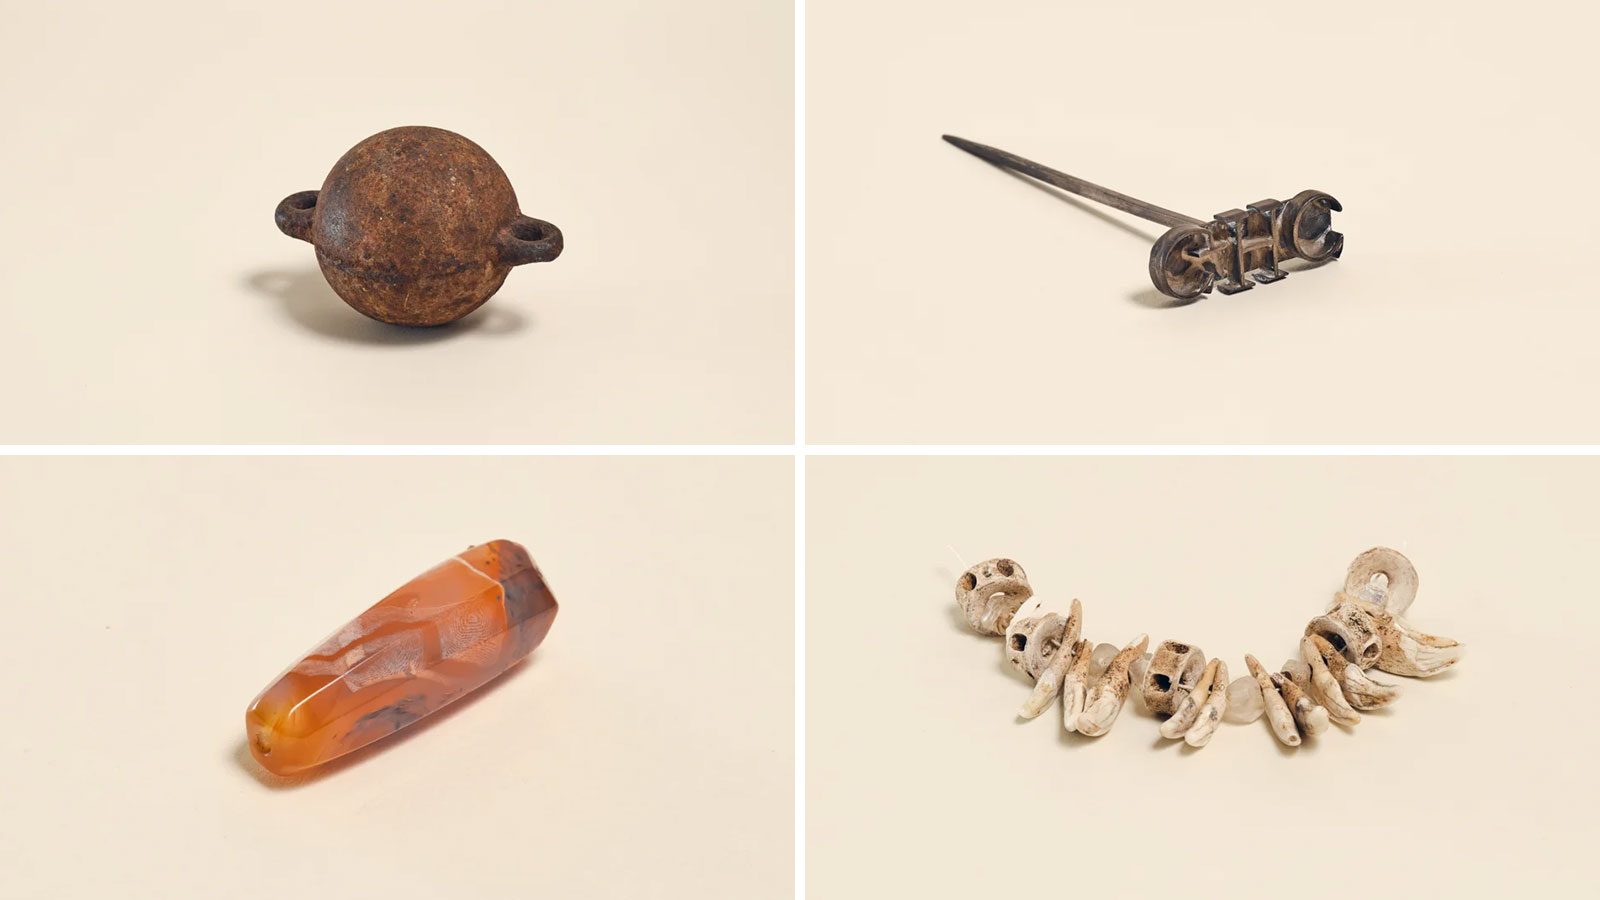 TOP RIGHT: A 24 lb. iron weight used to keep slaves from running away, at the Barbados Museum & Historical Society. TOP LEFT: A brand used to mark slaves in Jamaica, at the Barbados Museum & Historical Society. BOTTOM RIGHT: A precious gem used in jewelry excavated from the Newton Slave Burial Ground at the Barbados Museum & Historical Society. BOTTOM LEFT: A dogtooth necklace excavated from the Newton Slave Burial Ground, at the Barbados Museum & Historical Society.